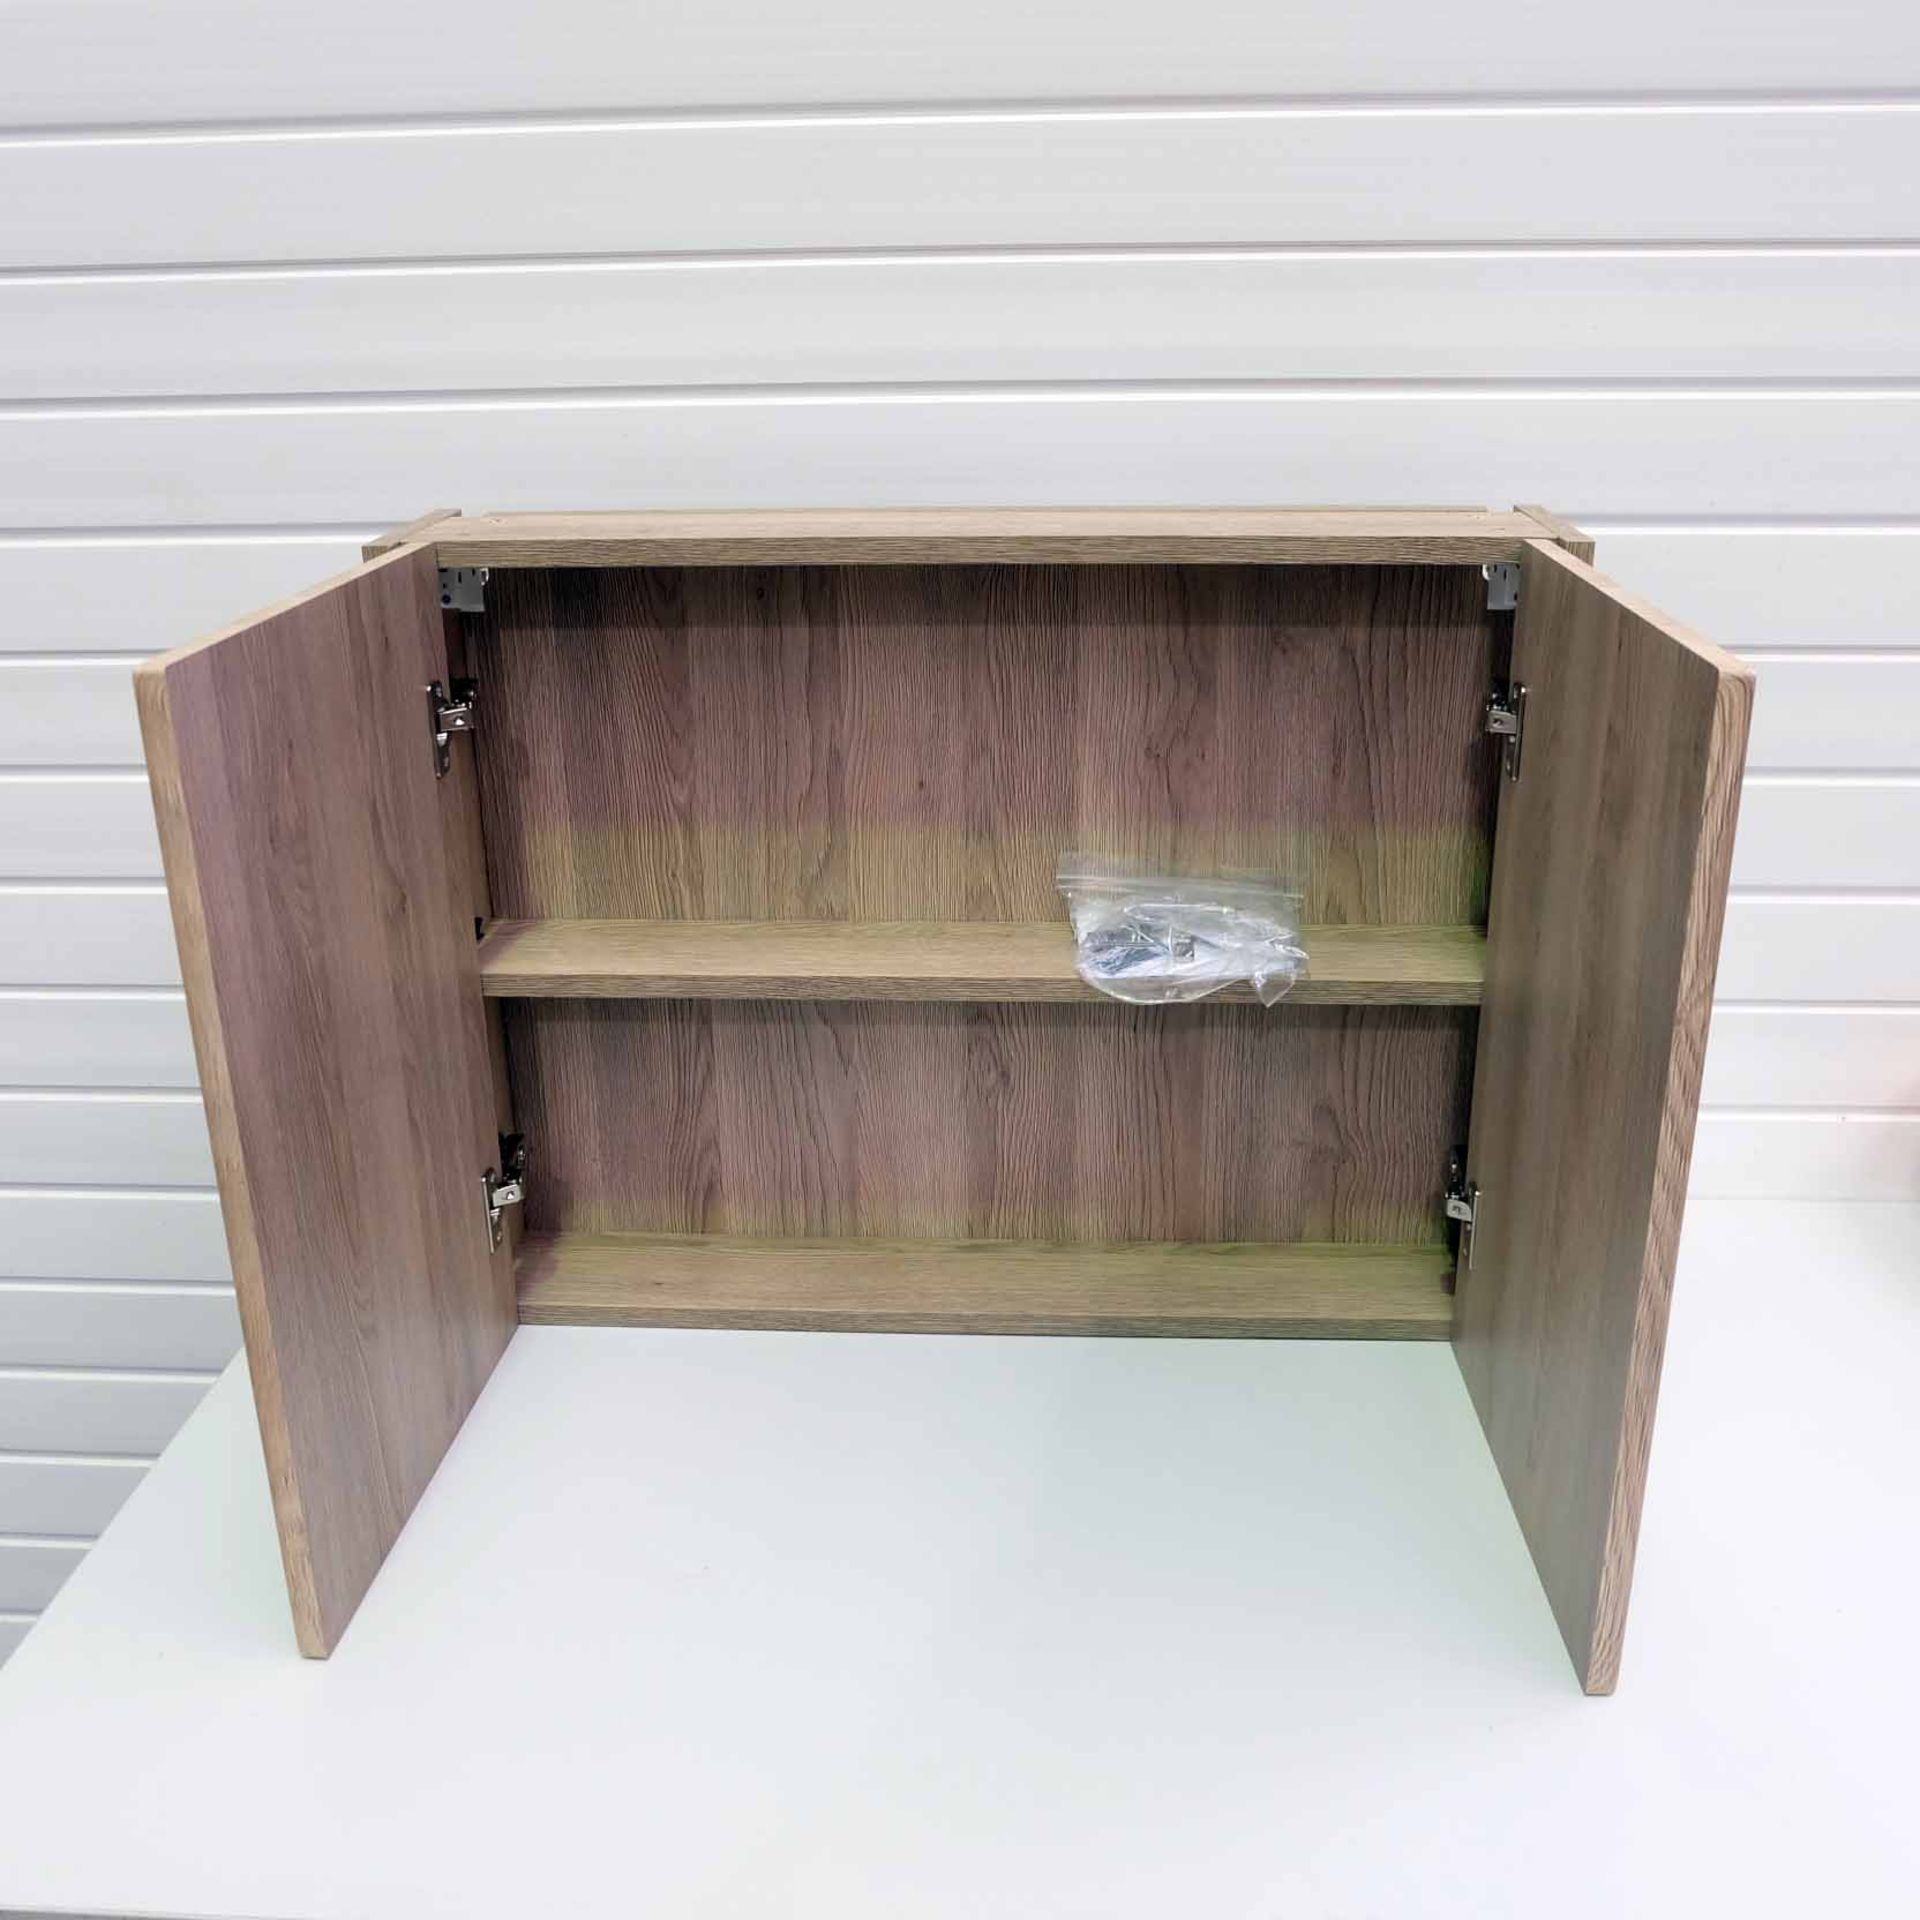 Mirrored Two Door Cabinet. With 1 x Shelf & 2 Handles. Size 790mm W x 162mm D x 597mm H. - Image 2 of 6